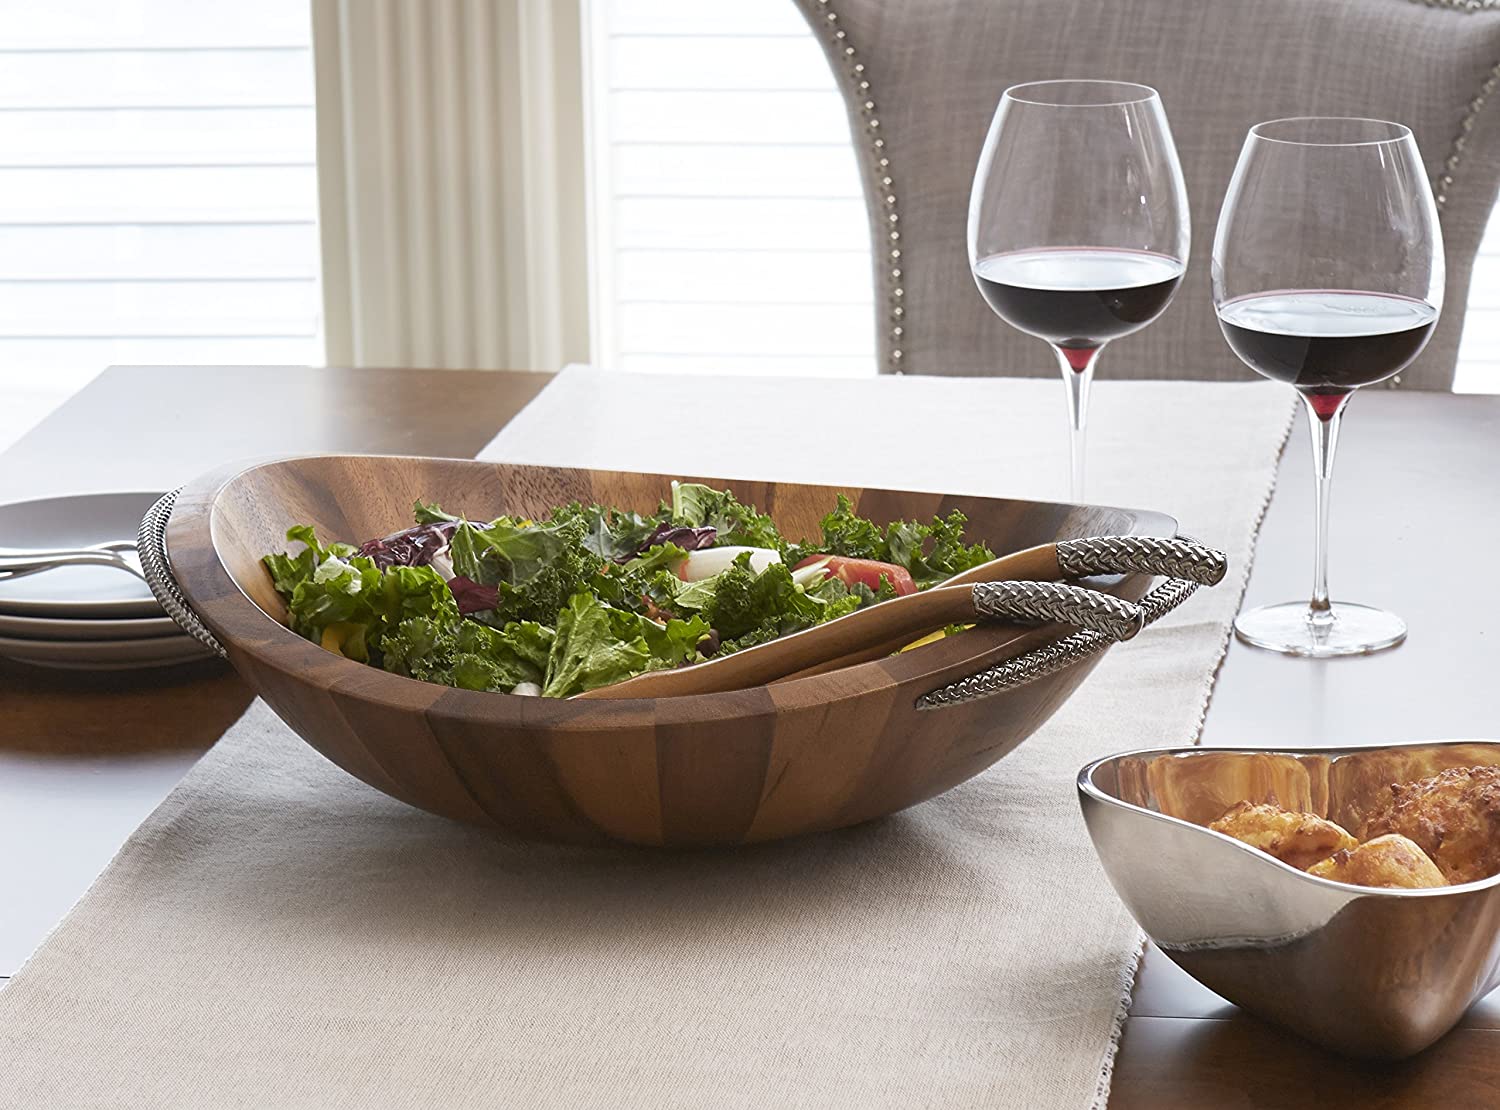 salad bowl on table with two wine glasses